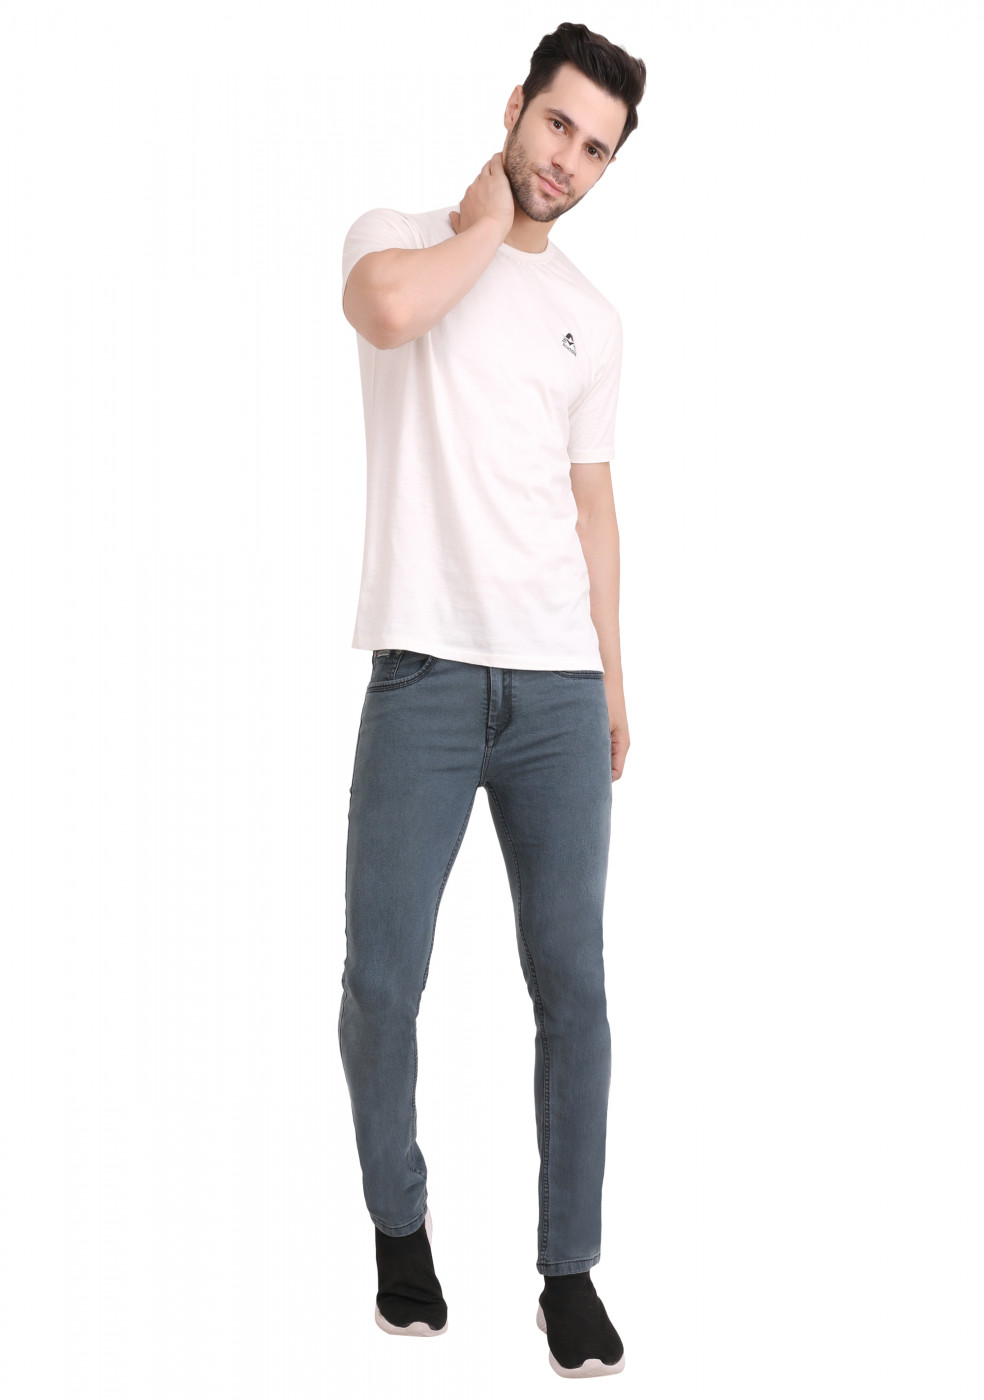 Light Weight Flat Finish Fabric Jeans For Men